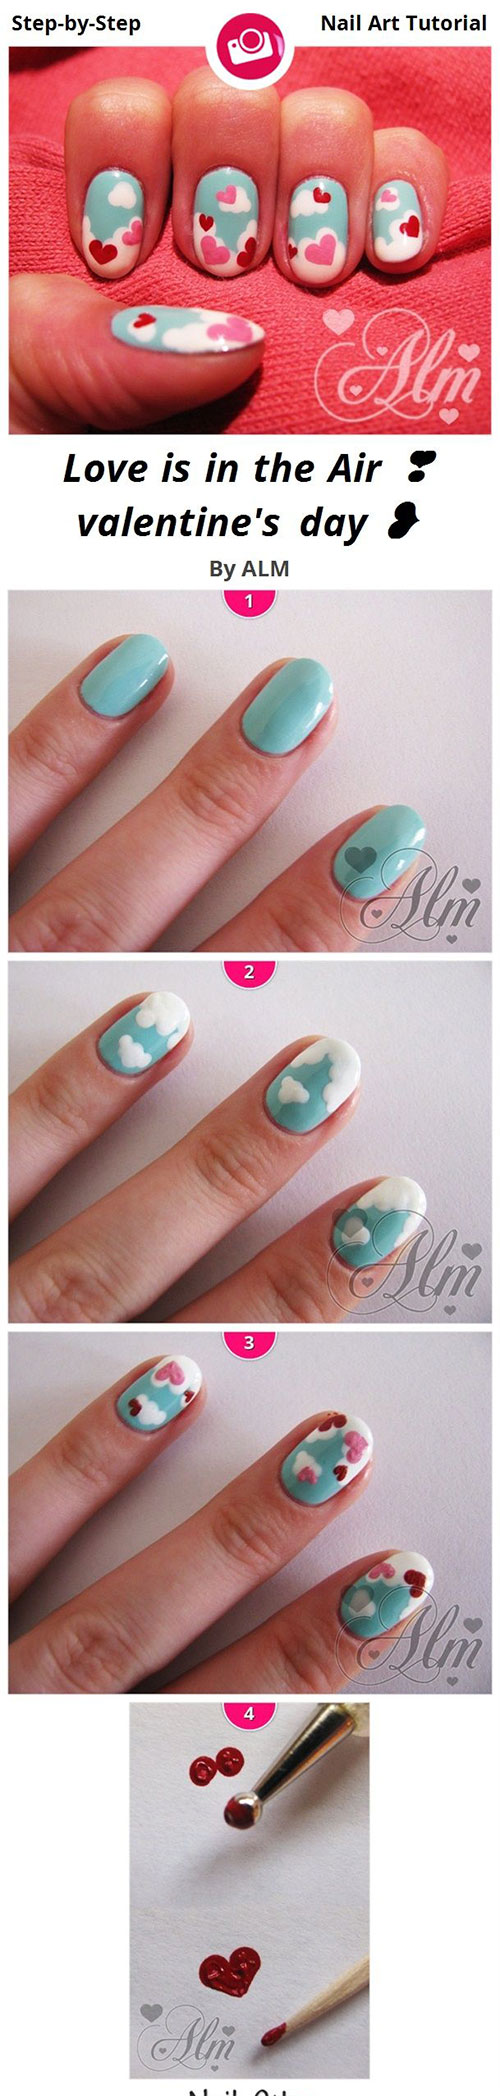 15-Easy-Step-By-Step-Valentines-Day-Nail-Art-Tutorials-For-Beginners-Learners-2015-10